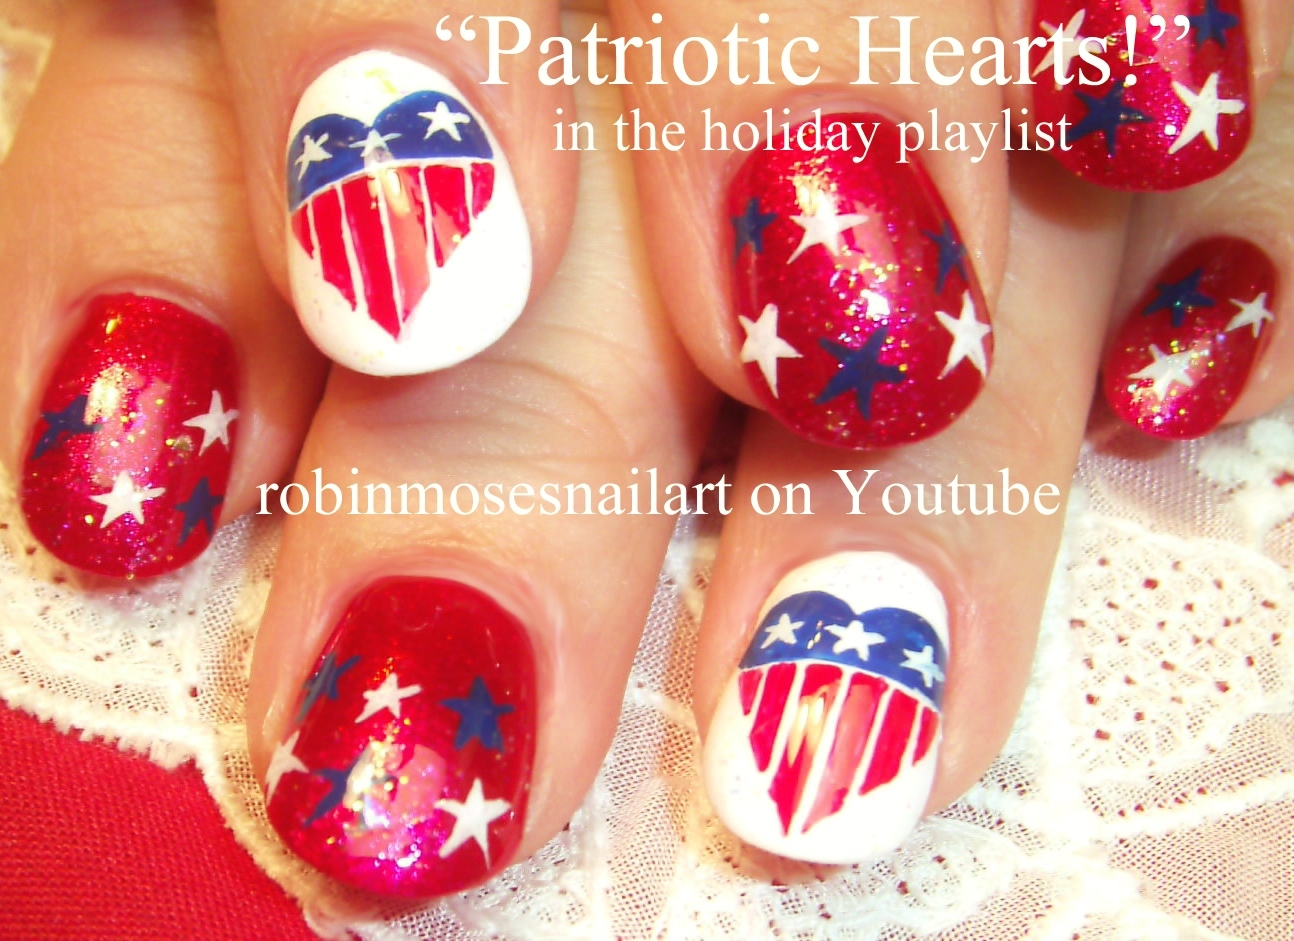 2. Easy DIY Fourth of July Nail Art Designs to Try at Home - wide 4